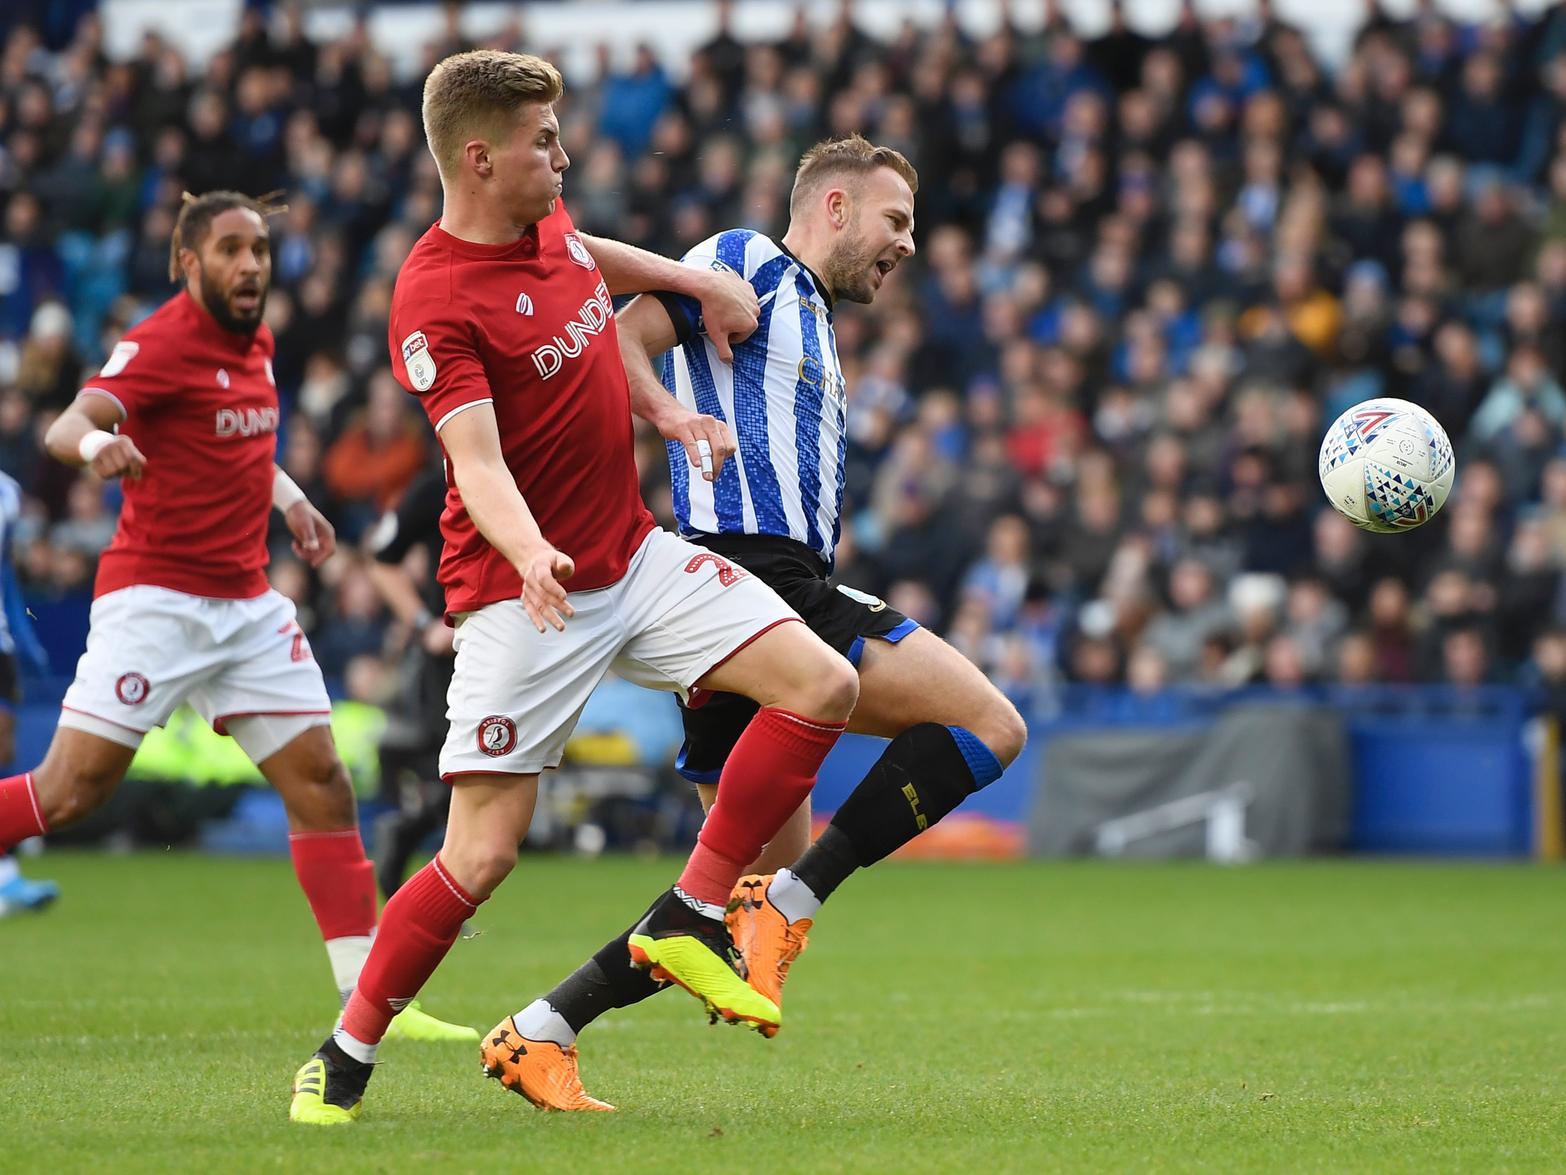 Sheffield Wednesday boss Garry Monk has hinted that Jordan Rhodes could leave the club in the next transfer window as his squad is 'unbalanced', but will only sanction a deal if it benefits the side. (Sheffield Star)